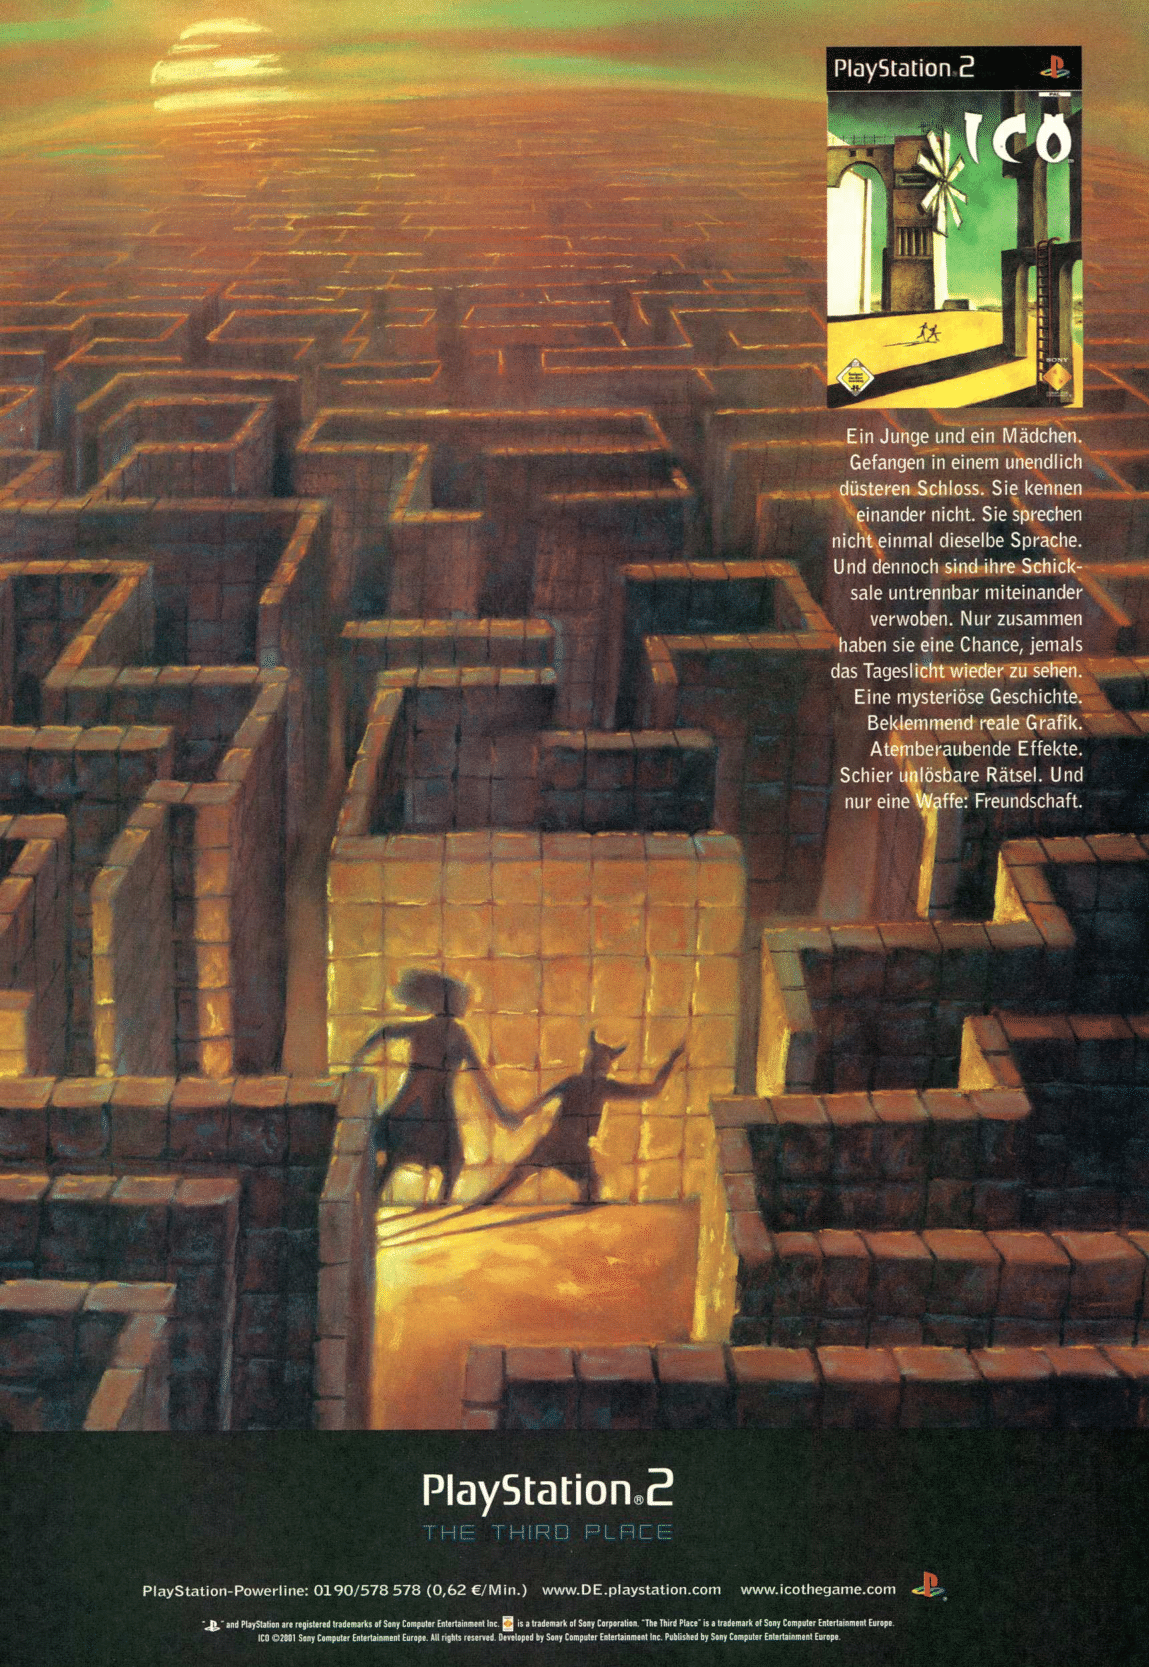 Image: A magazine ad featuring a maze unfolding into the distant horizon, within the confines, e-koʊ and yorudas silhouettes are splashed onto a brick wall by torchlight.